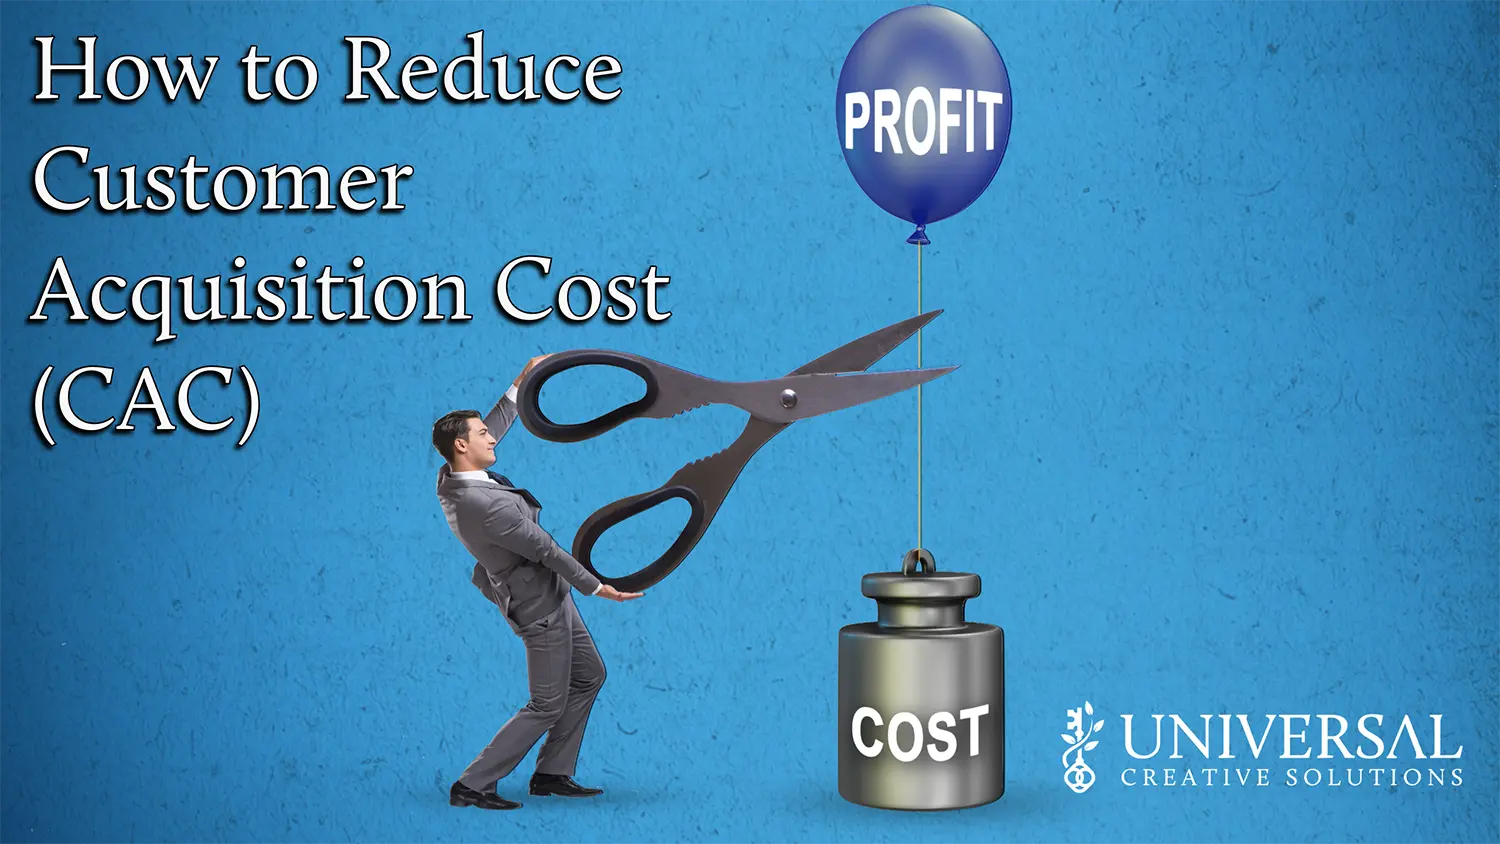 How to Reduce Customer Acquisition Cost (CAC)